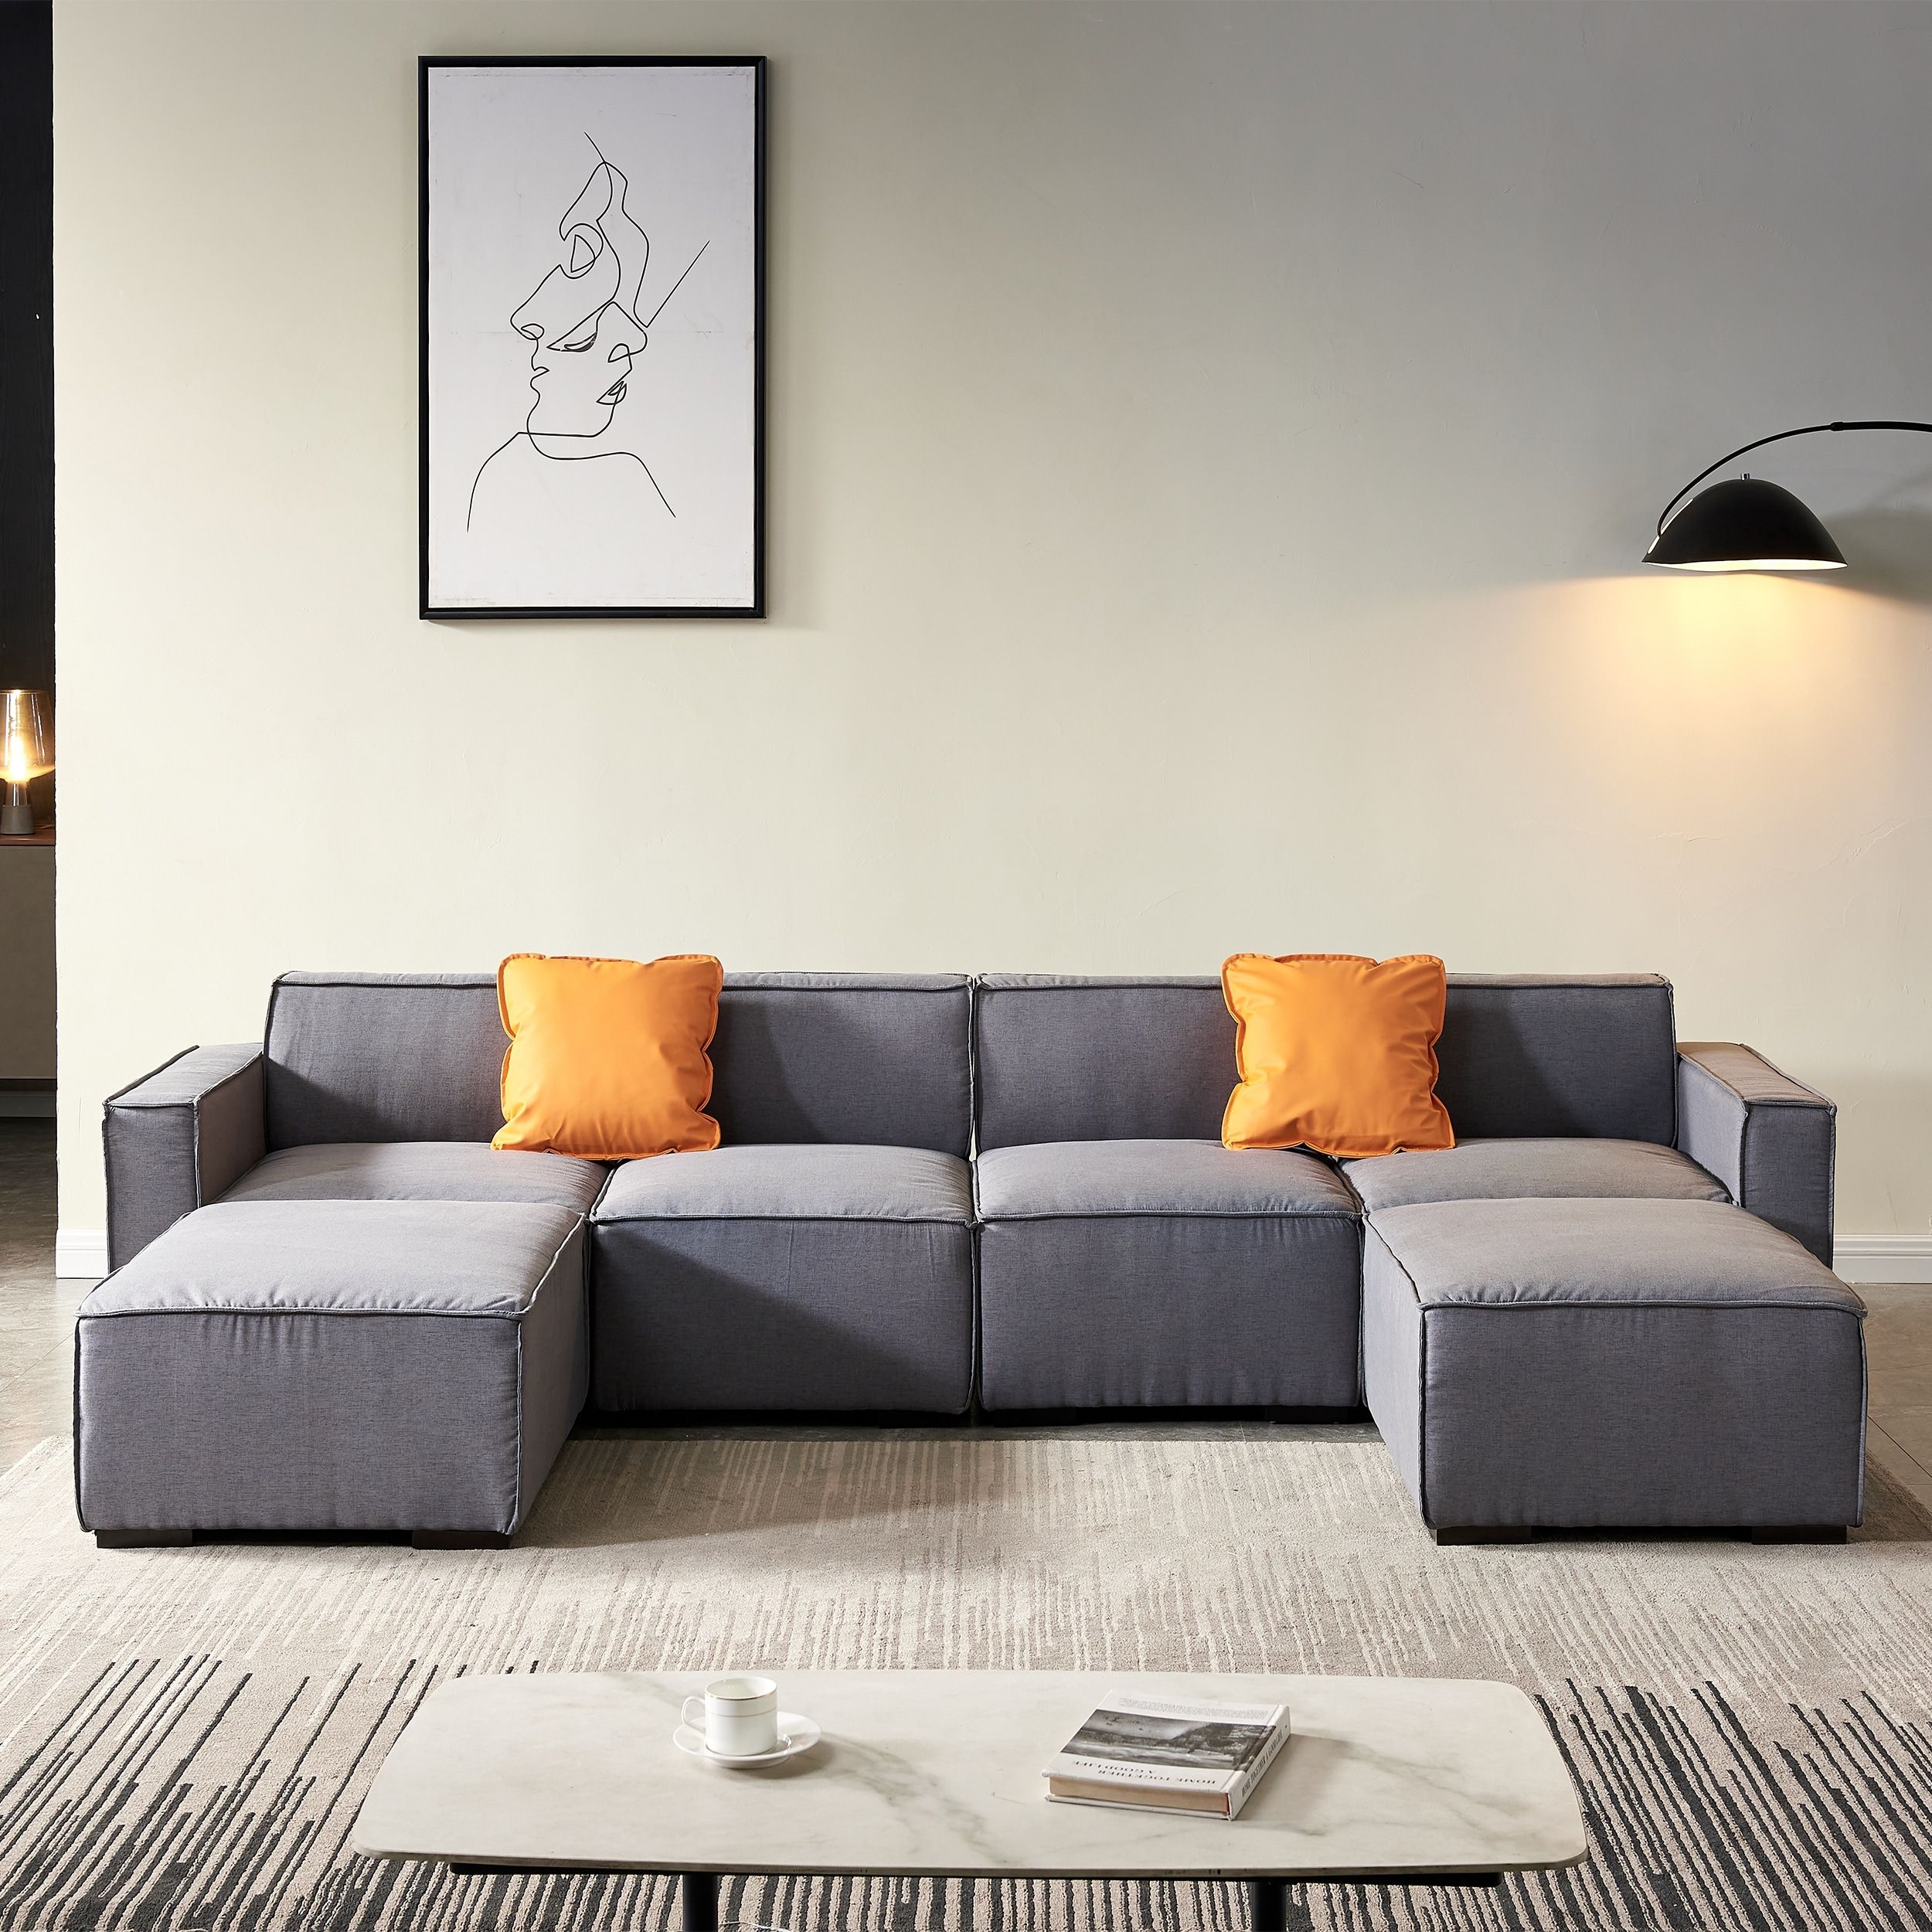 131" U Shape Sectional Sofa For Living Room, Modern Convertible Modular Sectional  Couch With Reversible Chaise & 2 Pillows – On Sale – Bed Bath & Beyond –  36752933 With Regard To Modern U Shape Sectional Sofas In Gray (View 13 of 15)